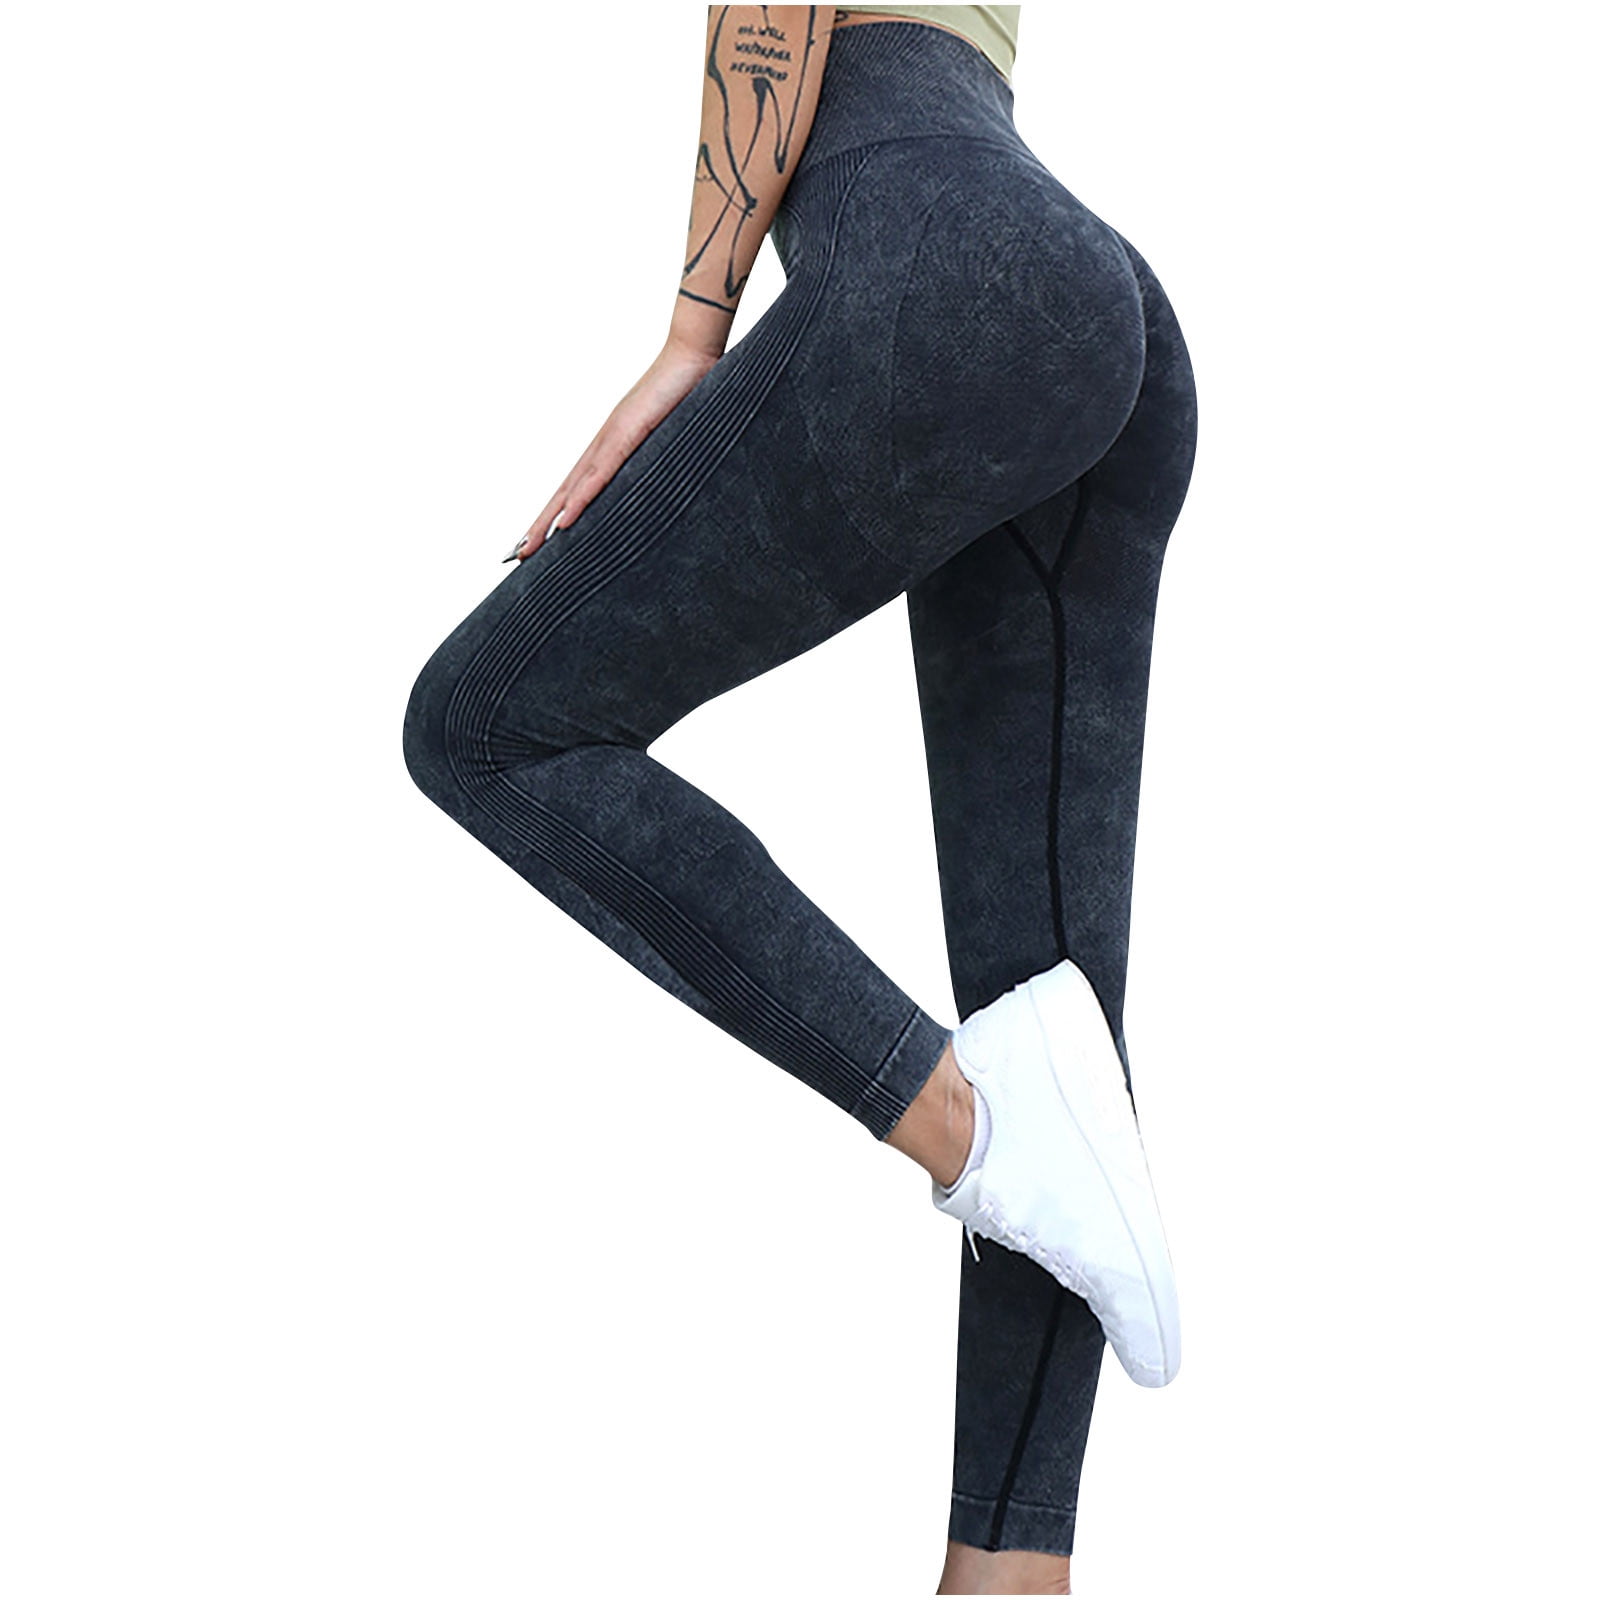 SEXYWG Women Yoga Pants Solid High Waist Fitness Gym Tights Push Up Sports  Leggings Seamless Trousers Workout Sportswear Pant